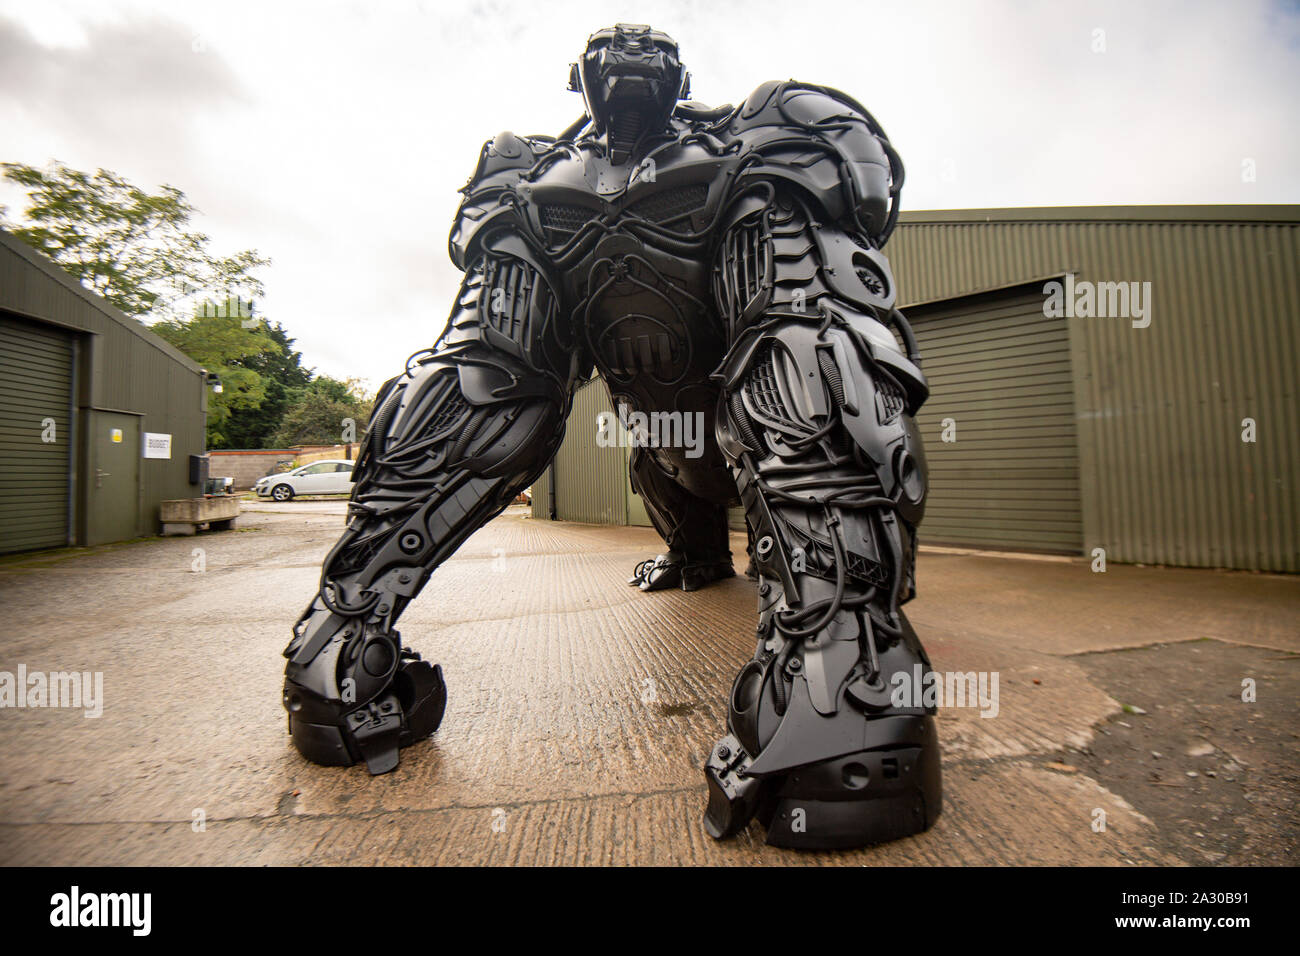 A 12ft sculpture of a gorilla, entitled 'Gorilla Apocalypse', created by Luke Kite entirely from scrap car bumpers and panels discarded from only the last decade, on display at the British Ironwork Centre in Oswestry, Shropshire. Stock Photo